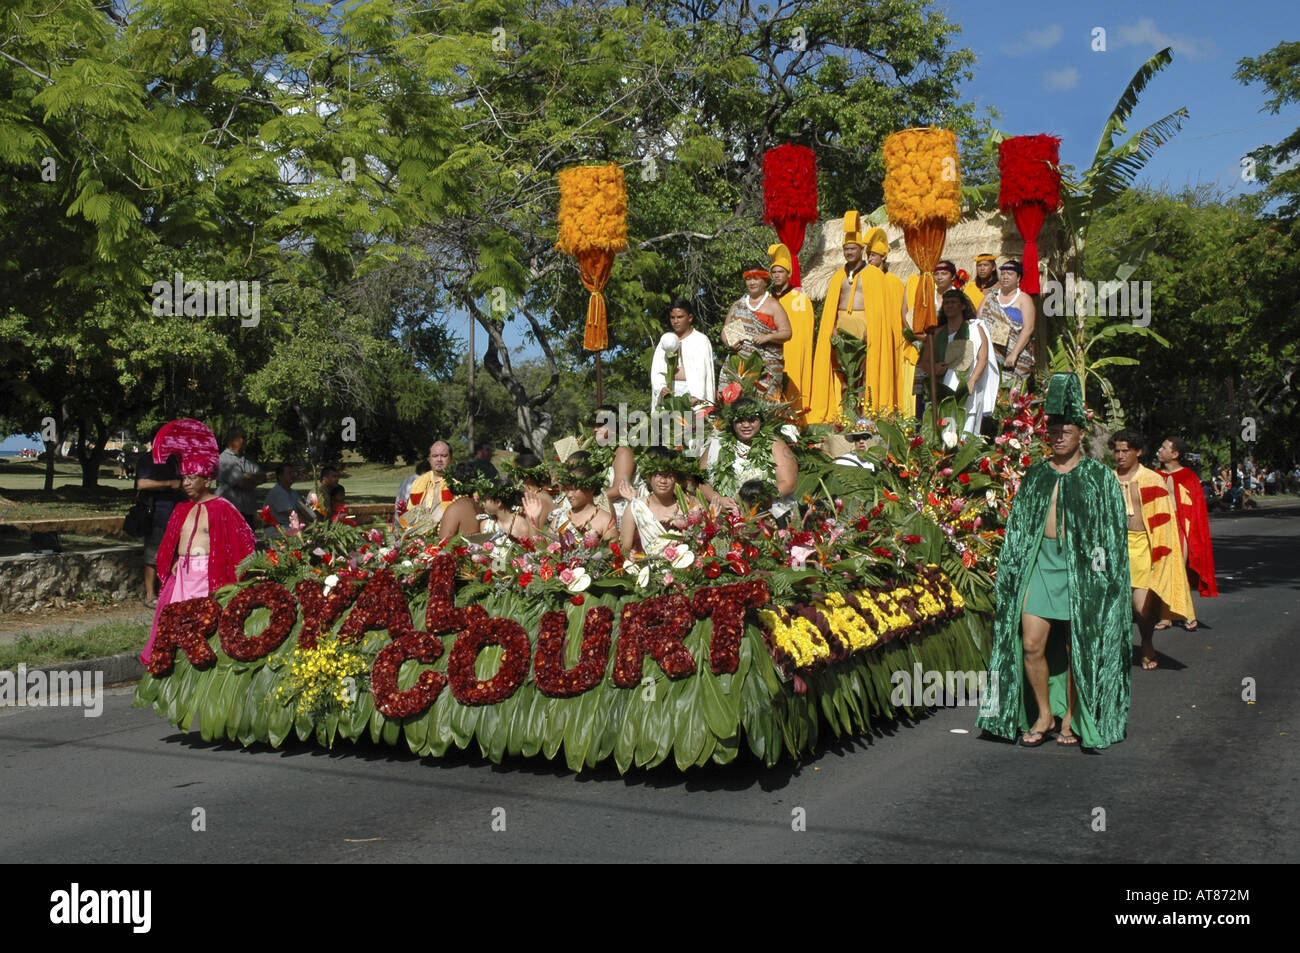 The Royal Court float in the annual Aloha Festivals Parade Stock Photo